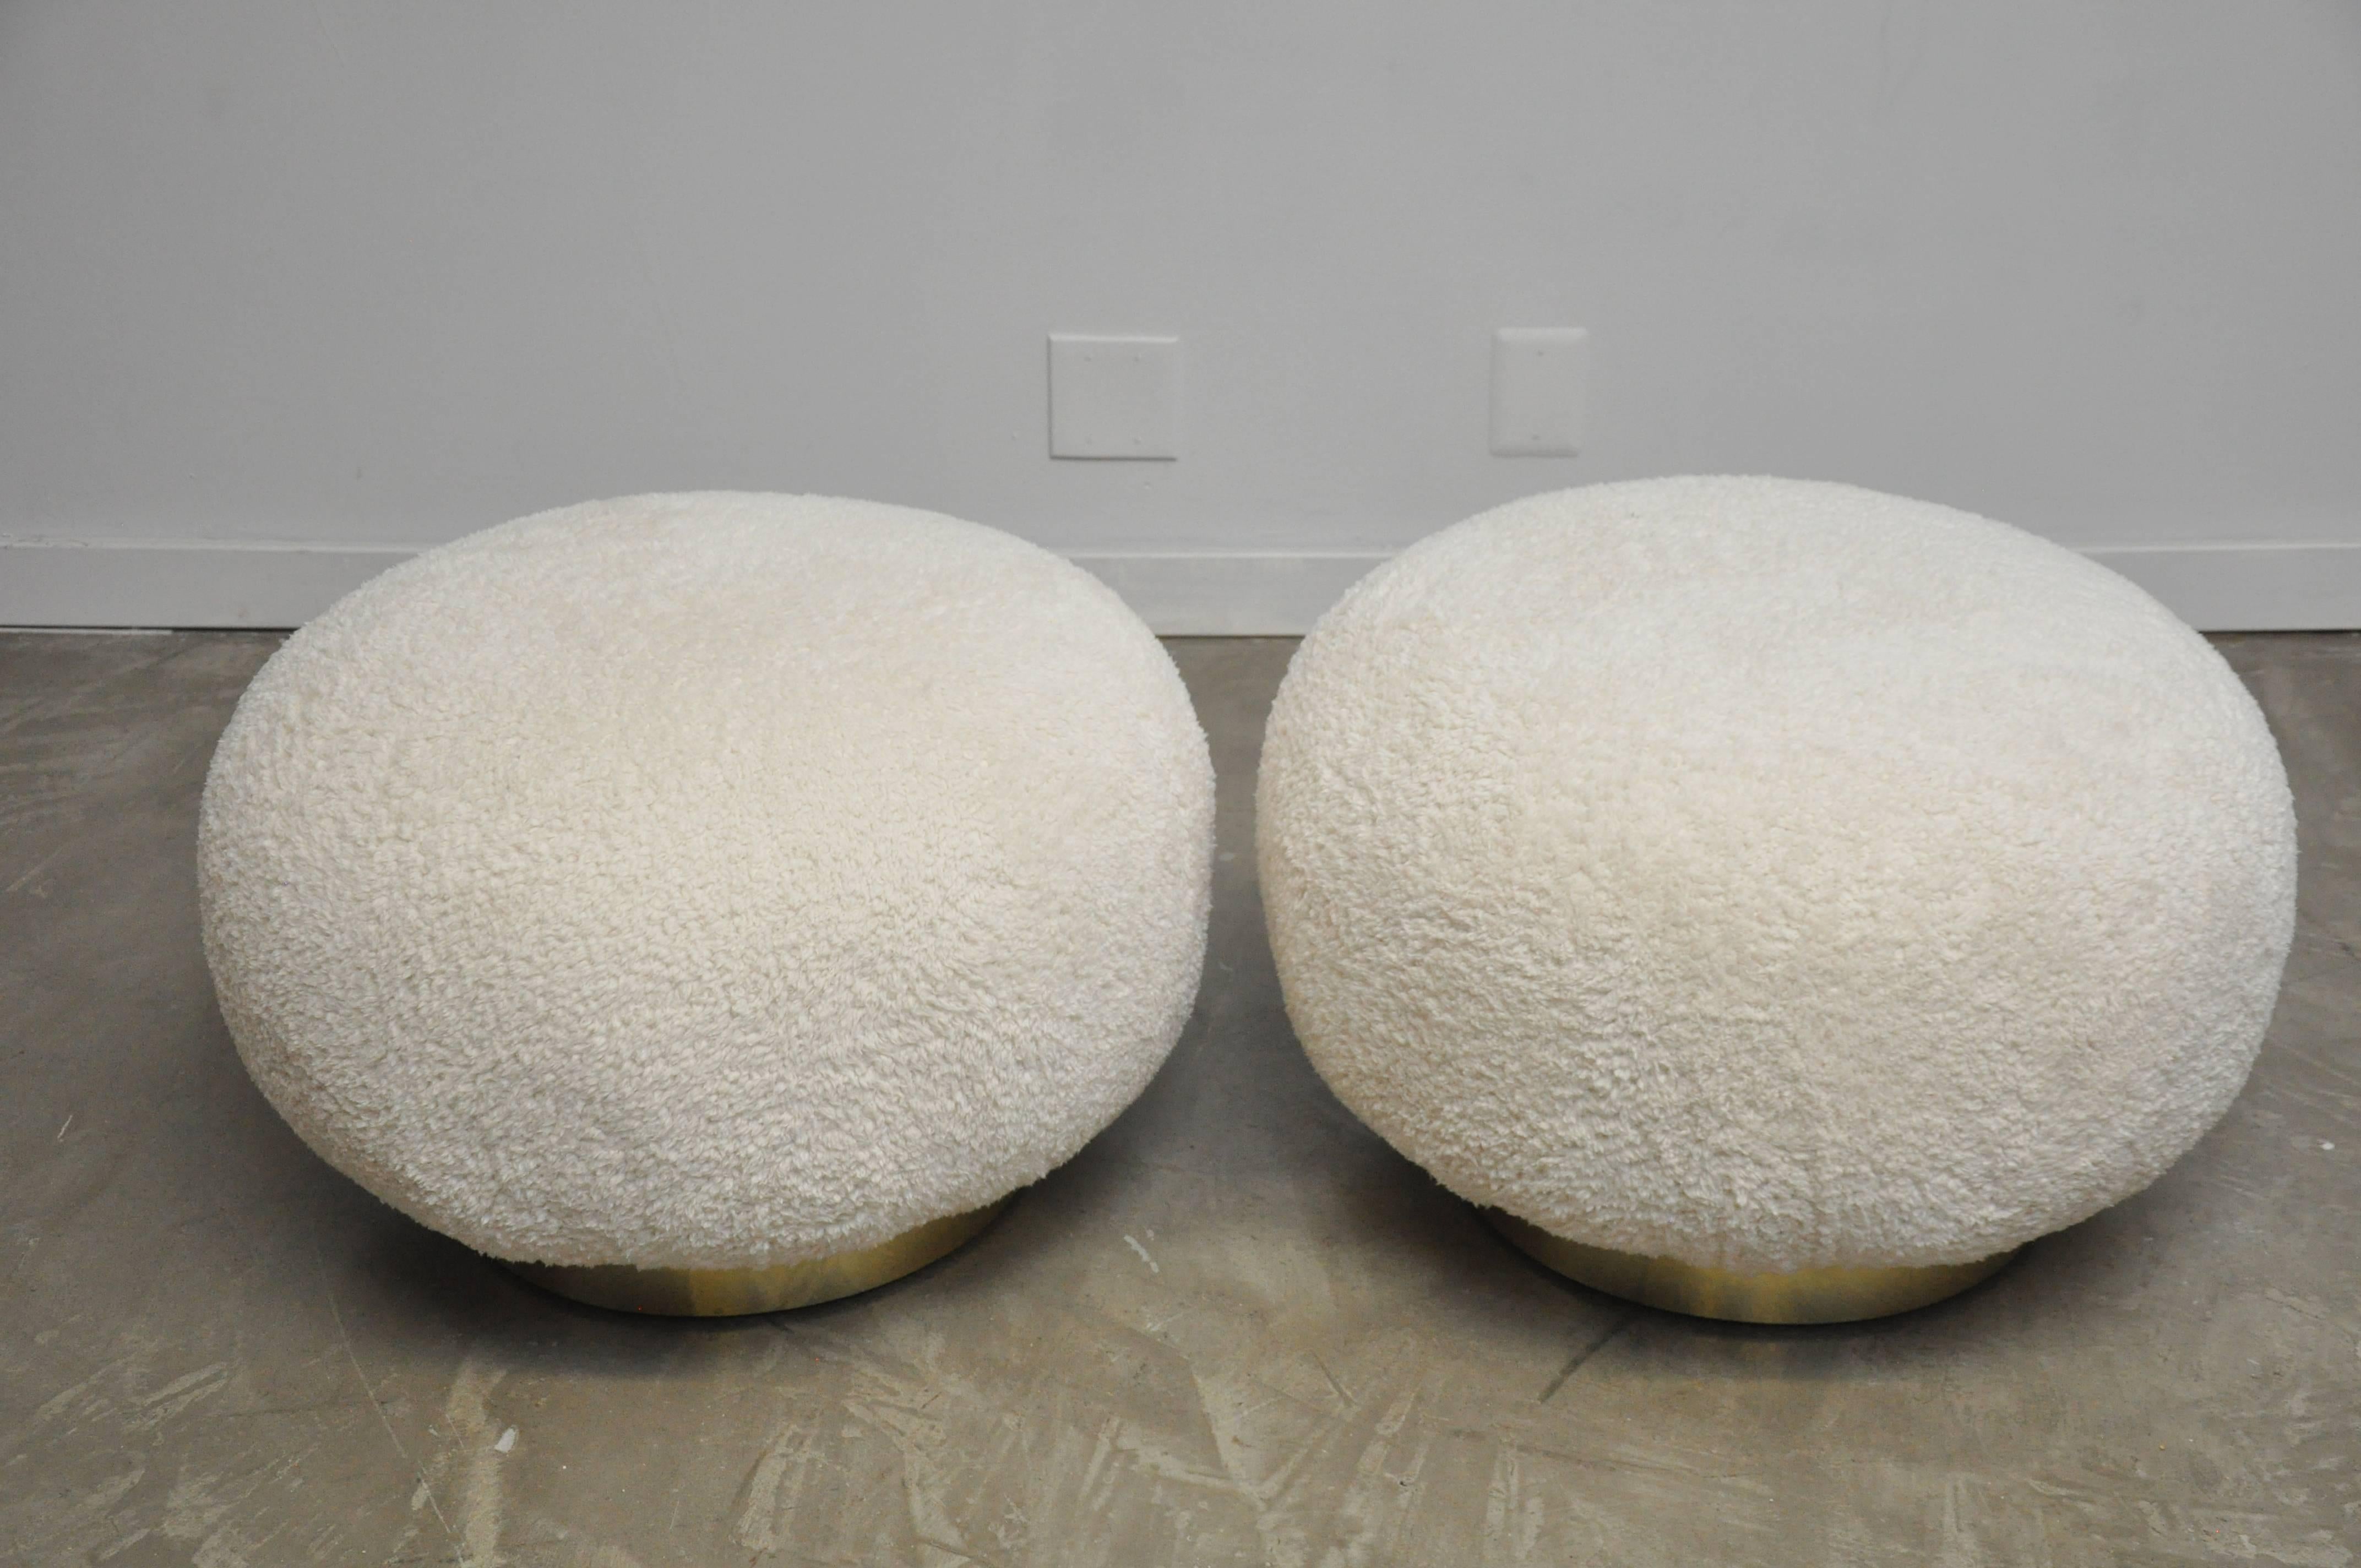 Pair of swivel stools by Adrian Pearsall for Comfort Design. Plush white upholstery over brass bases.